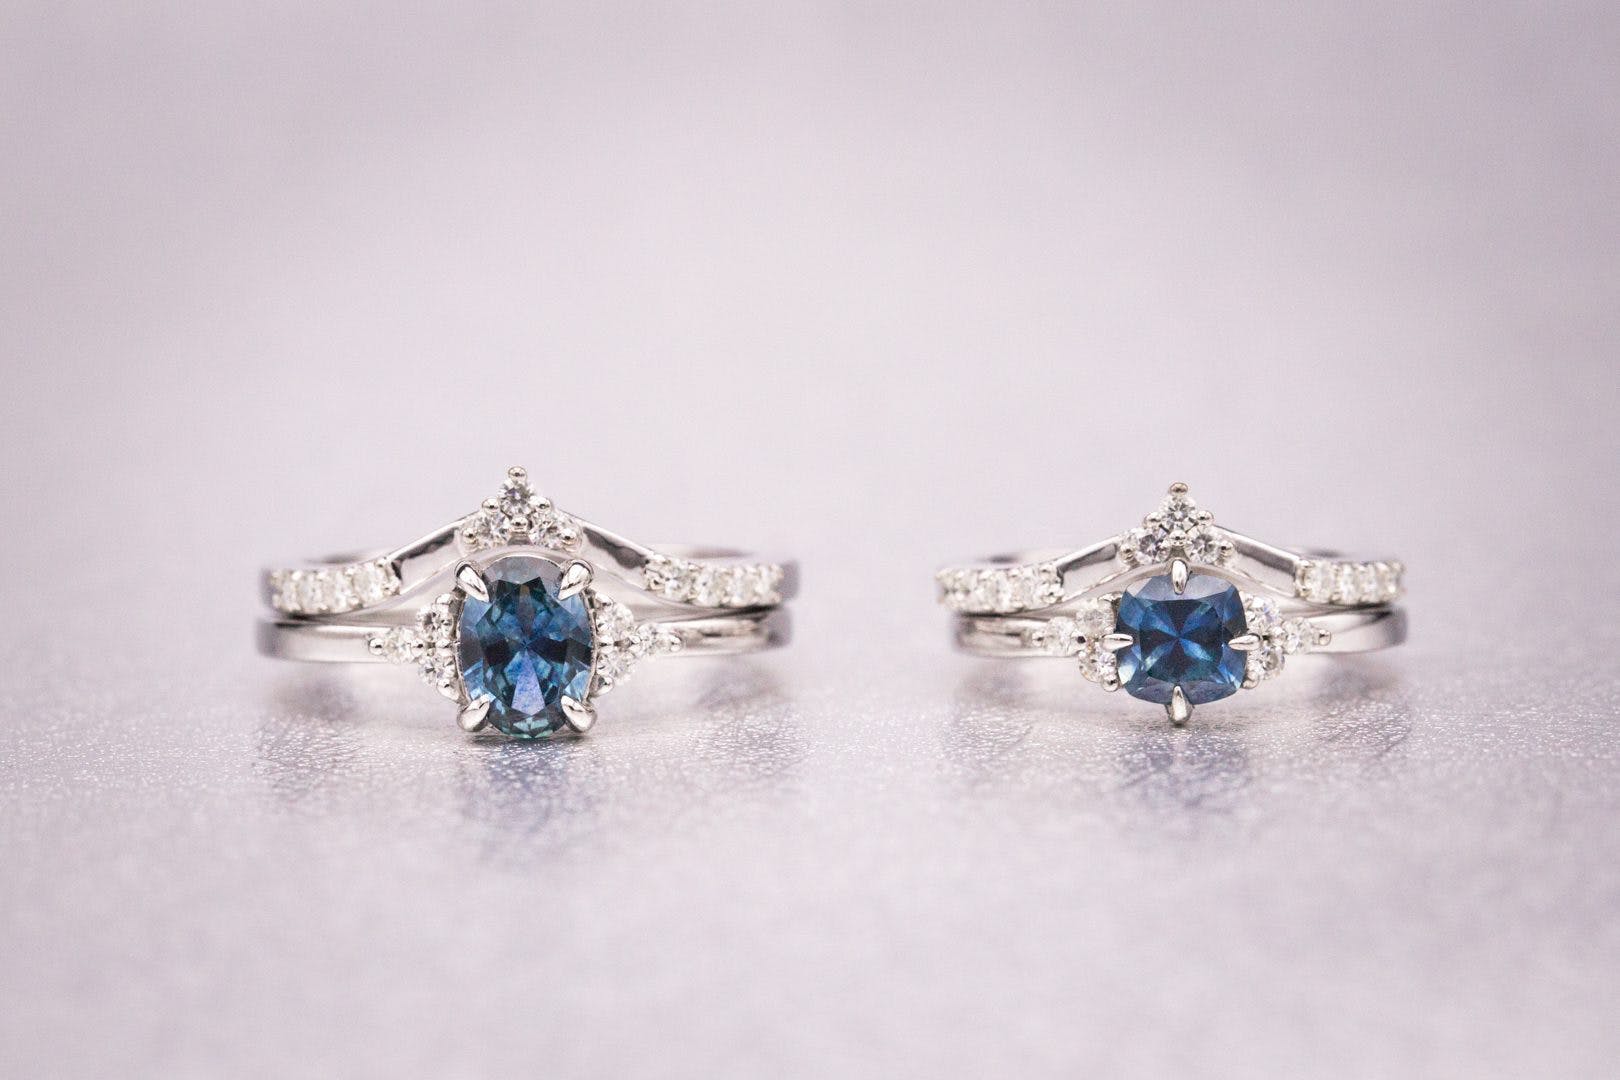 Why We Love Montana Sapphires and Yogo Sapphires